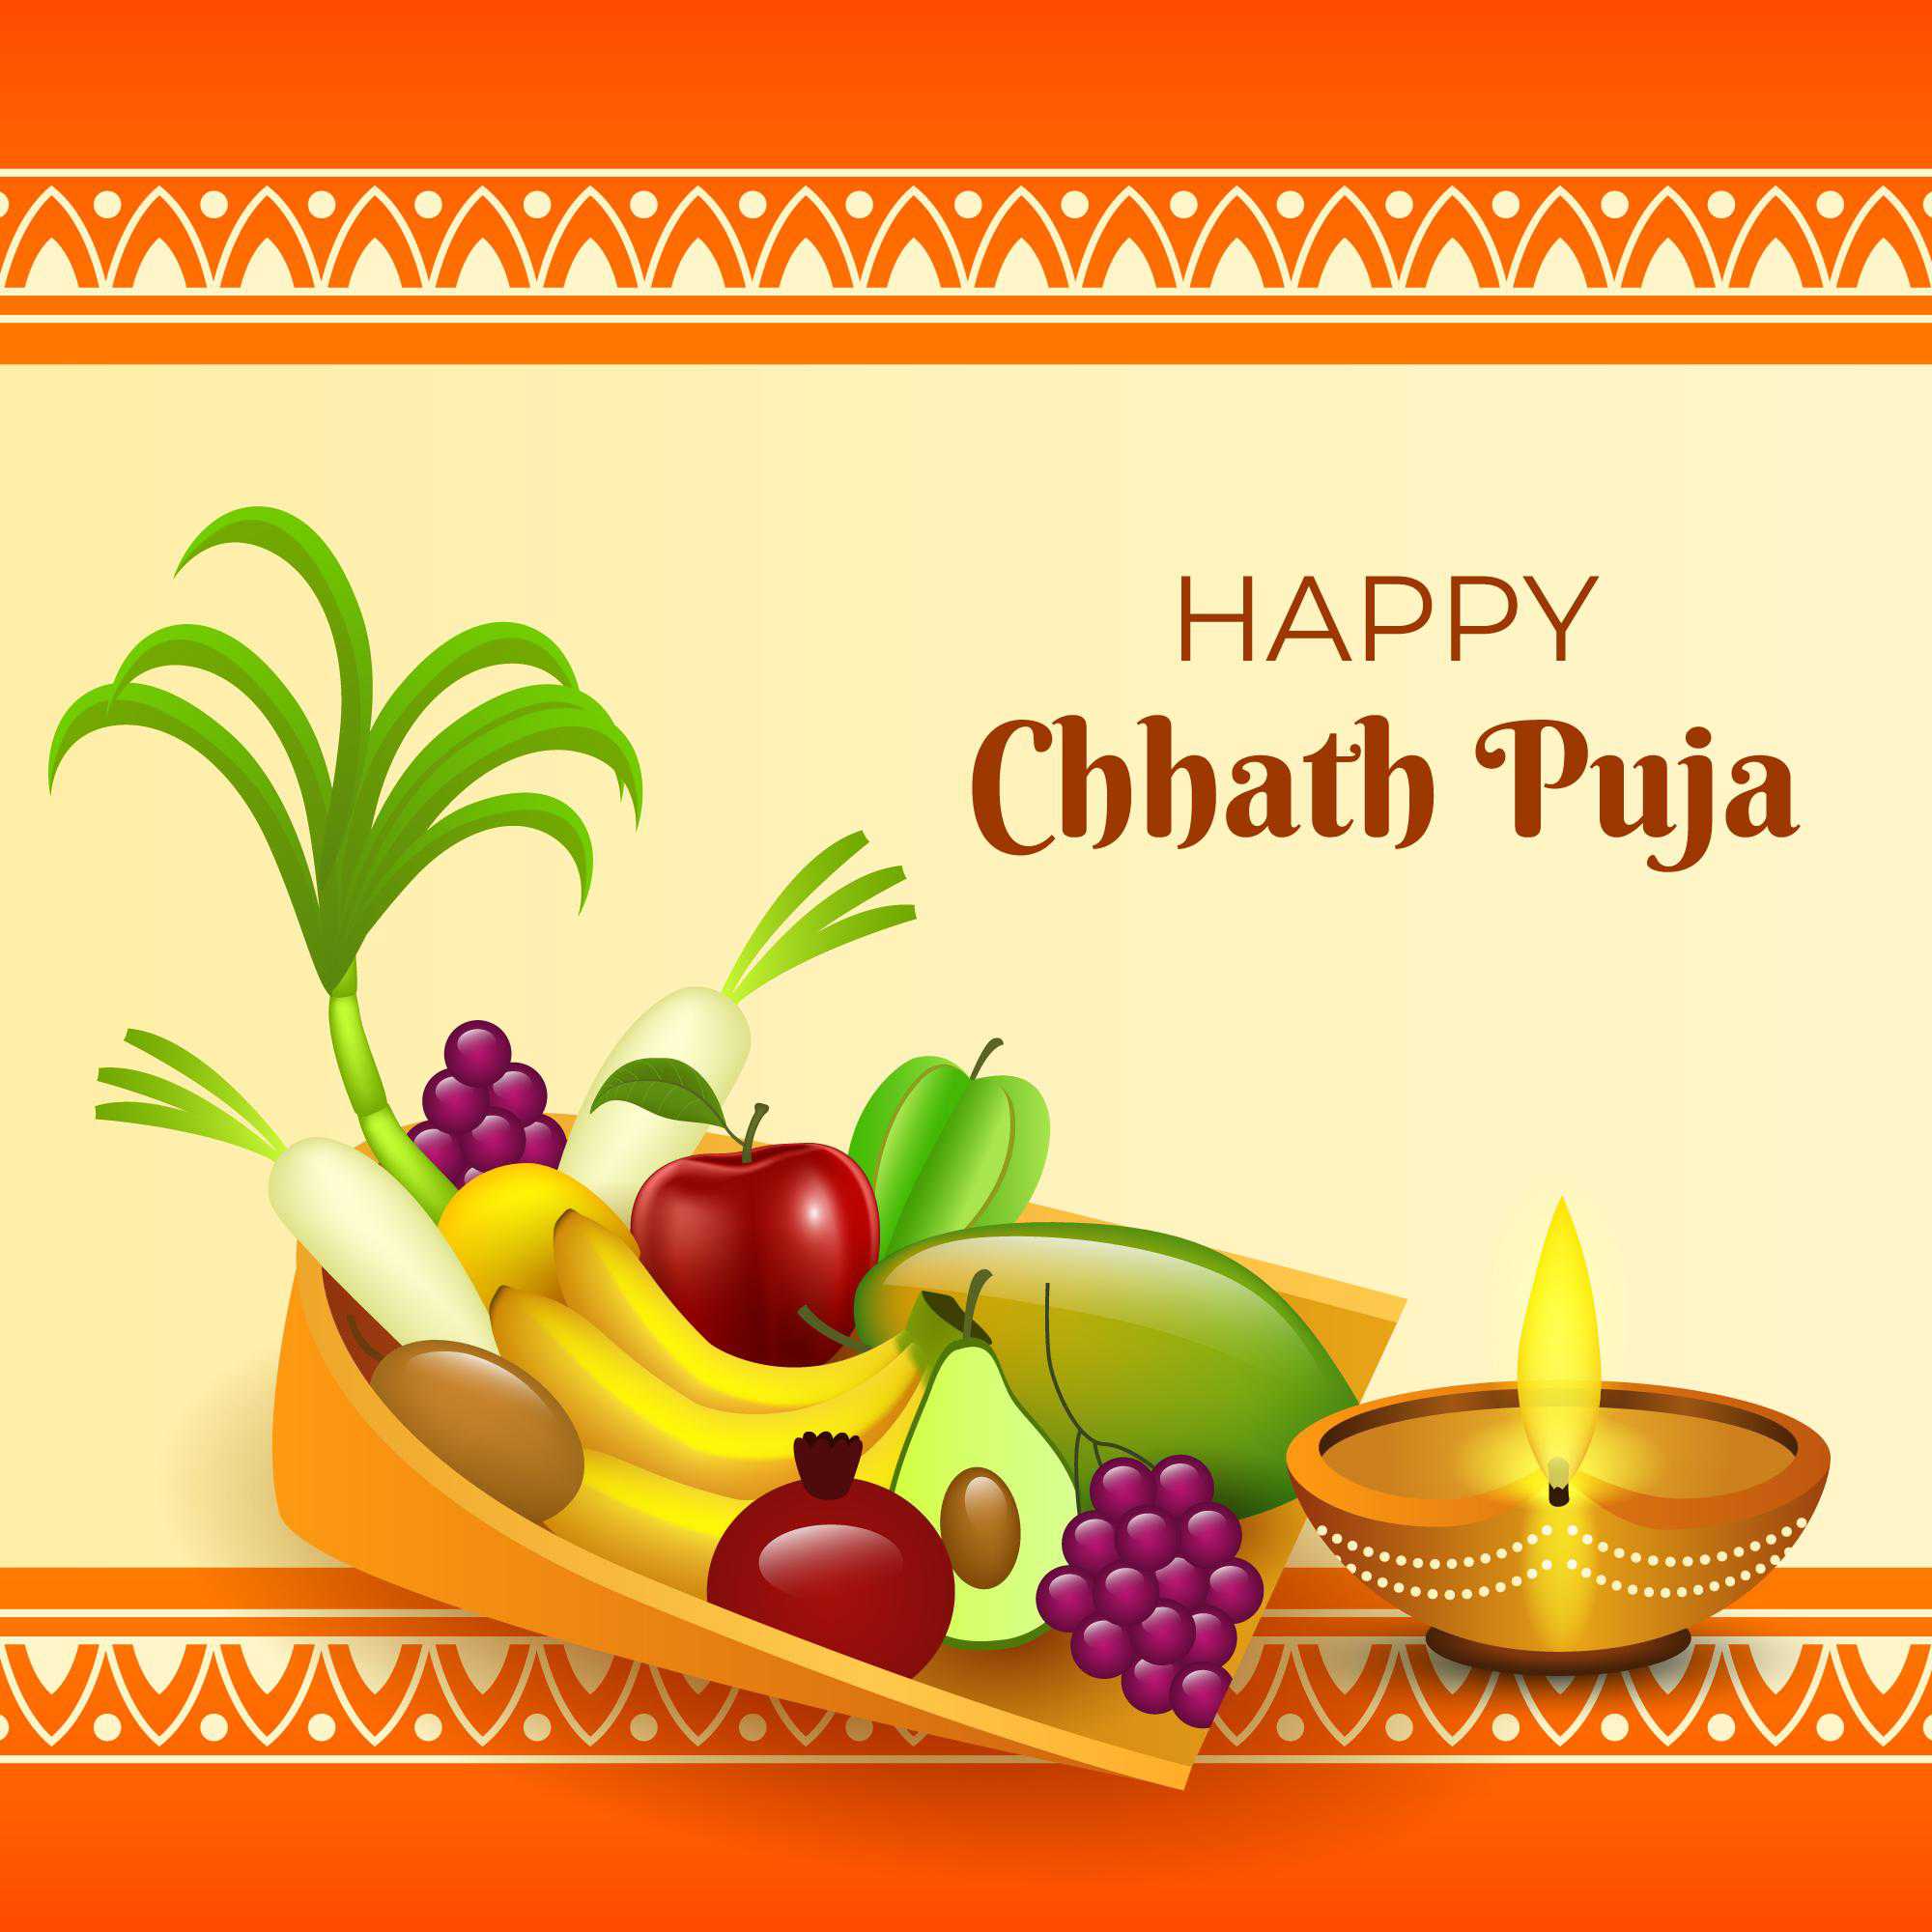 Chhath puja 2019 date time subh muhurat greetings wishes quotes sms wishes images  hd wallpapers whatsapp status messages shayari to your family and relatives   Happy Chhath Pooja 2019छठ पर दसत क